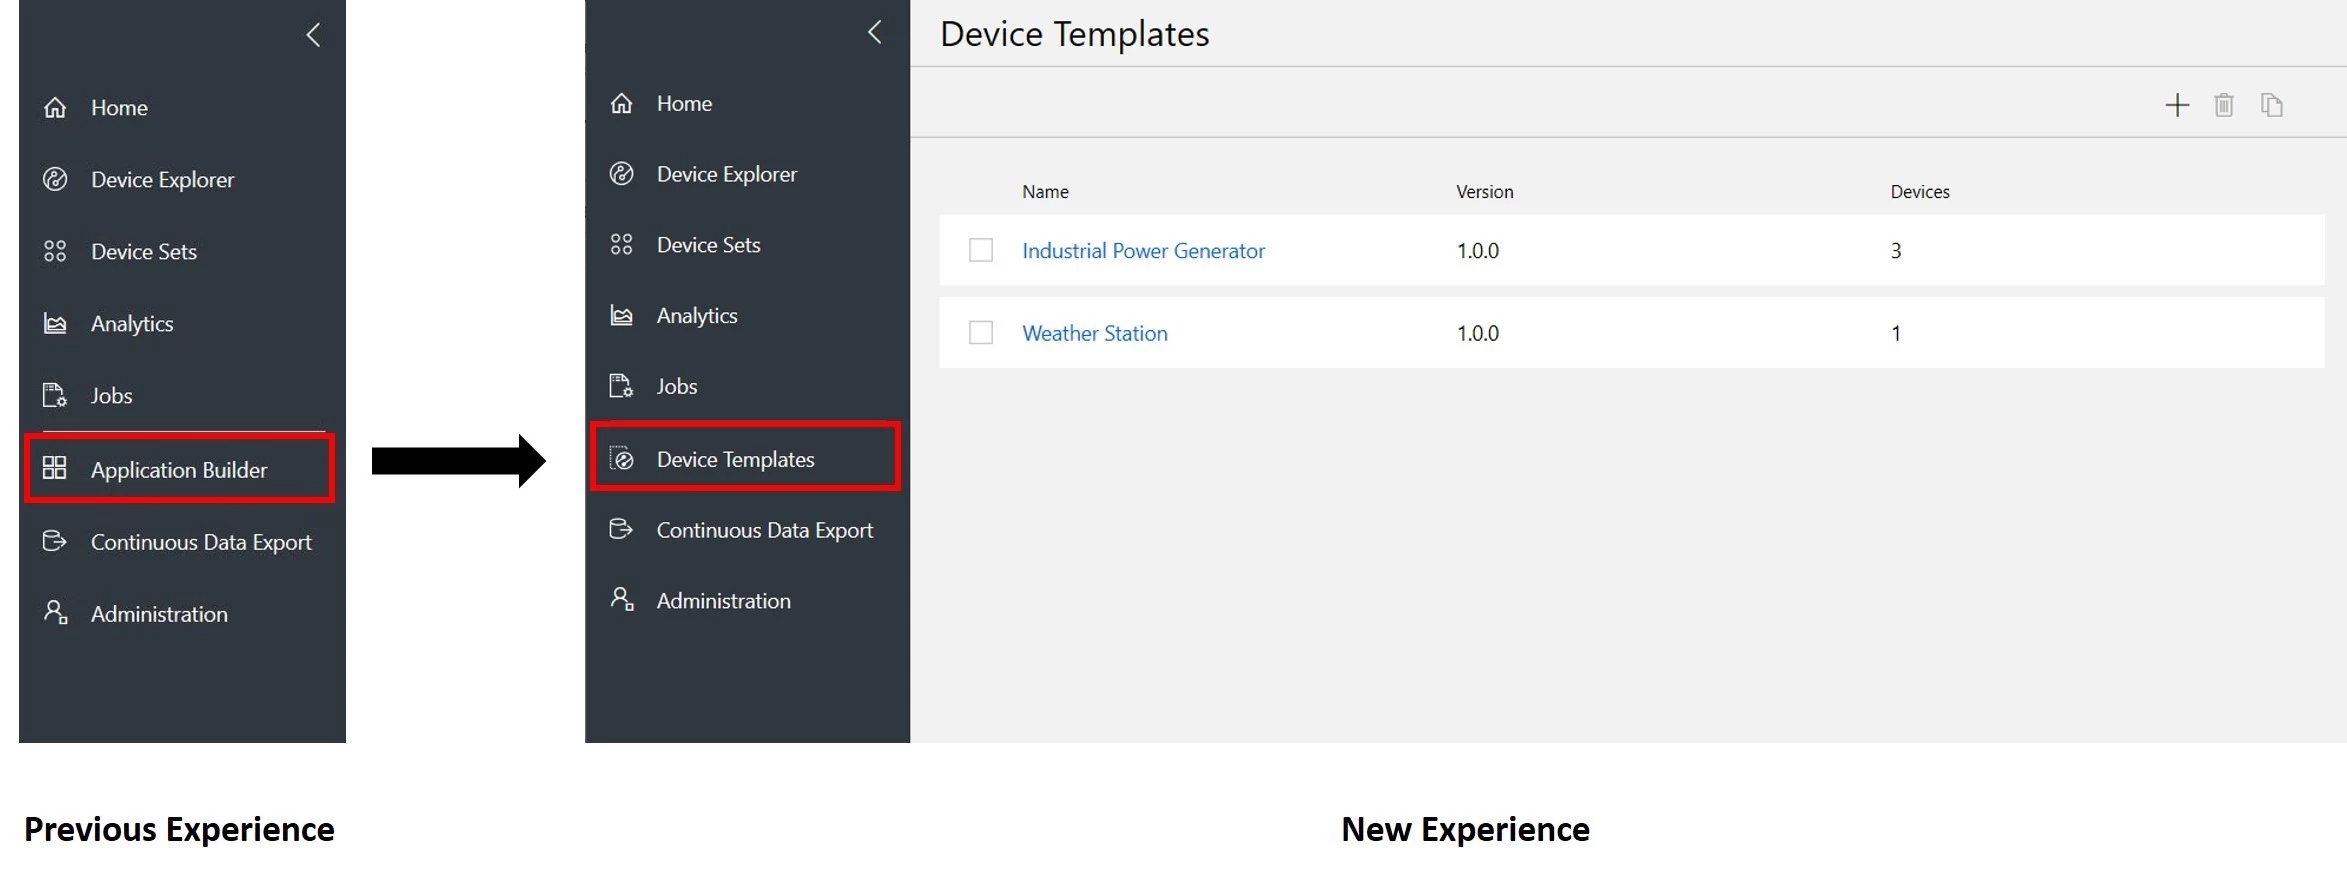 Device modeling experience in Azure IoT Central